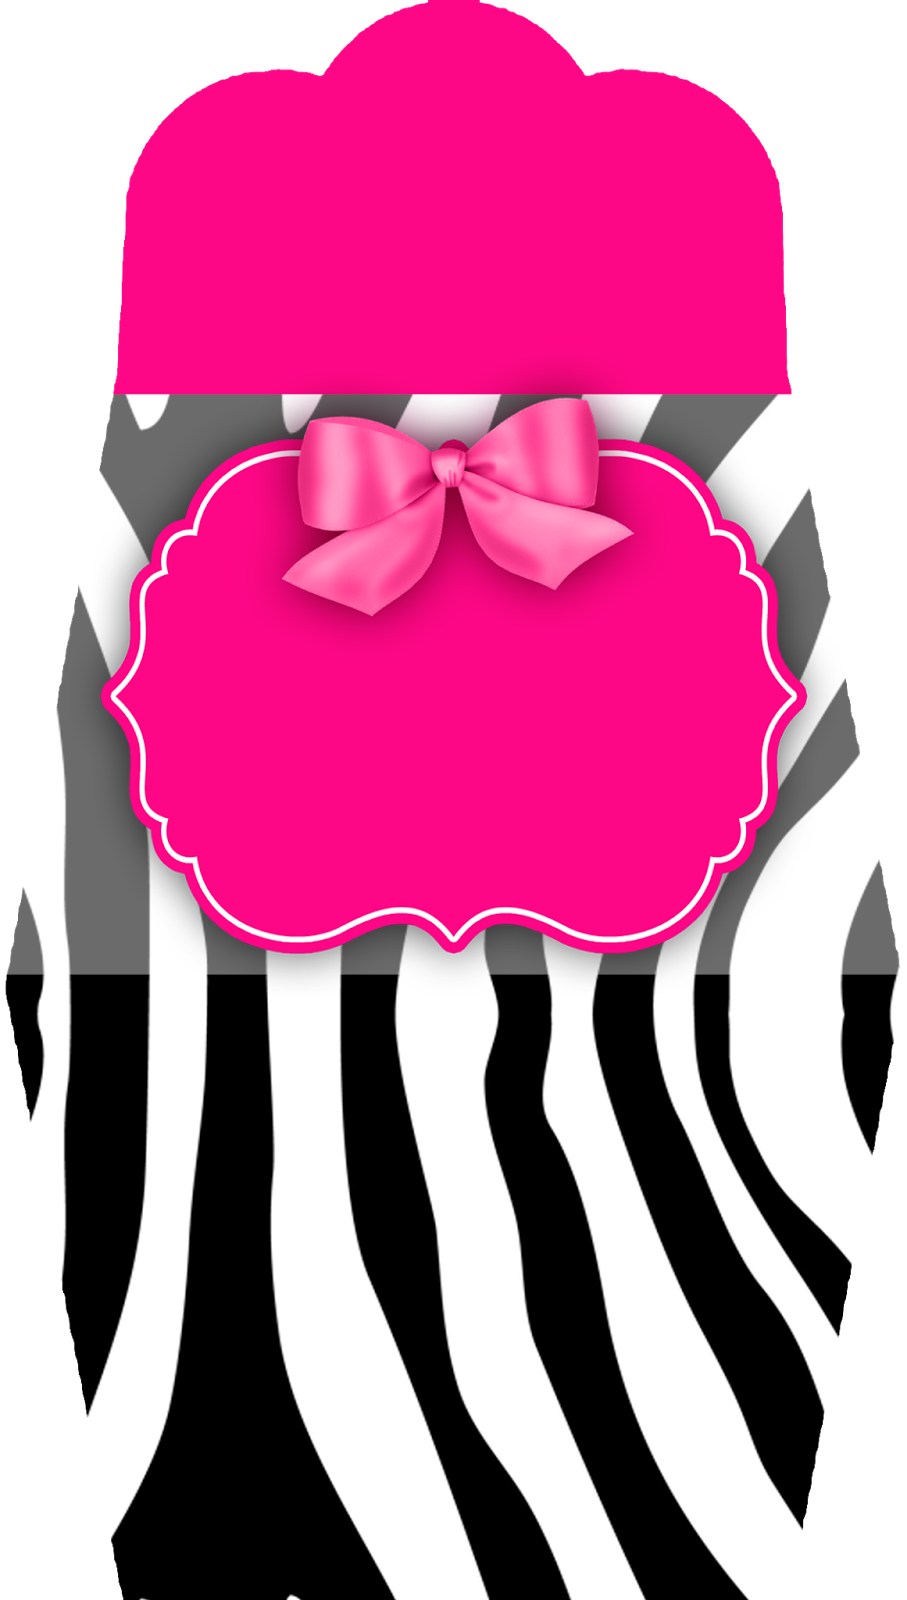 zebra-and-pink-free-printable-purse-invitations-oh-my-quinceaneras